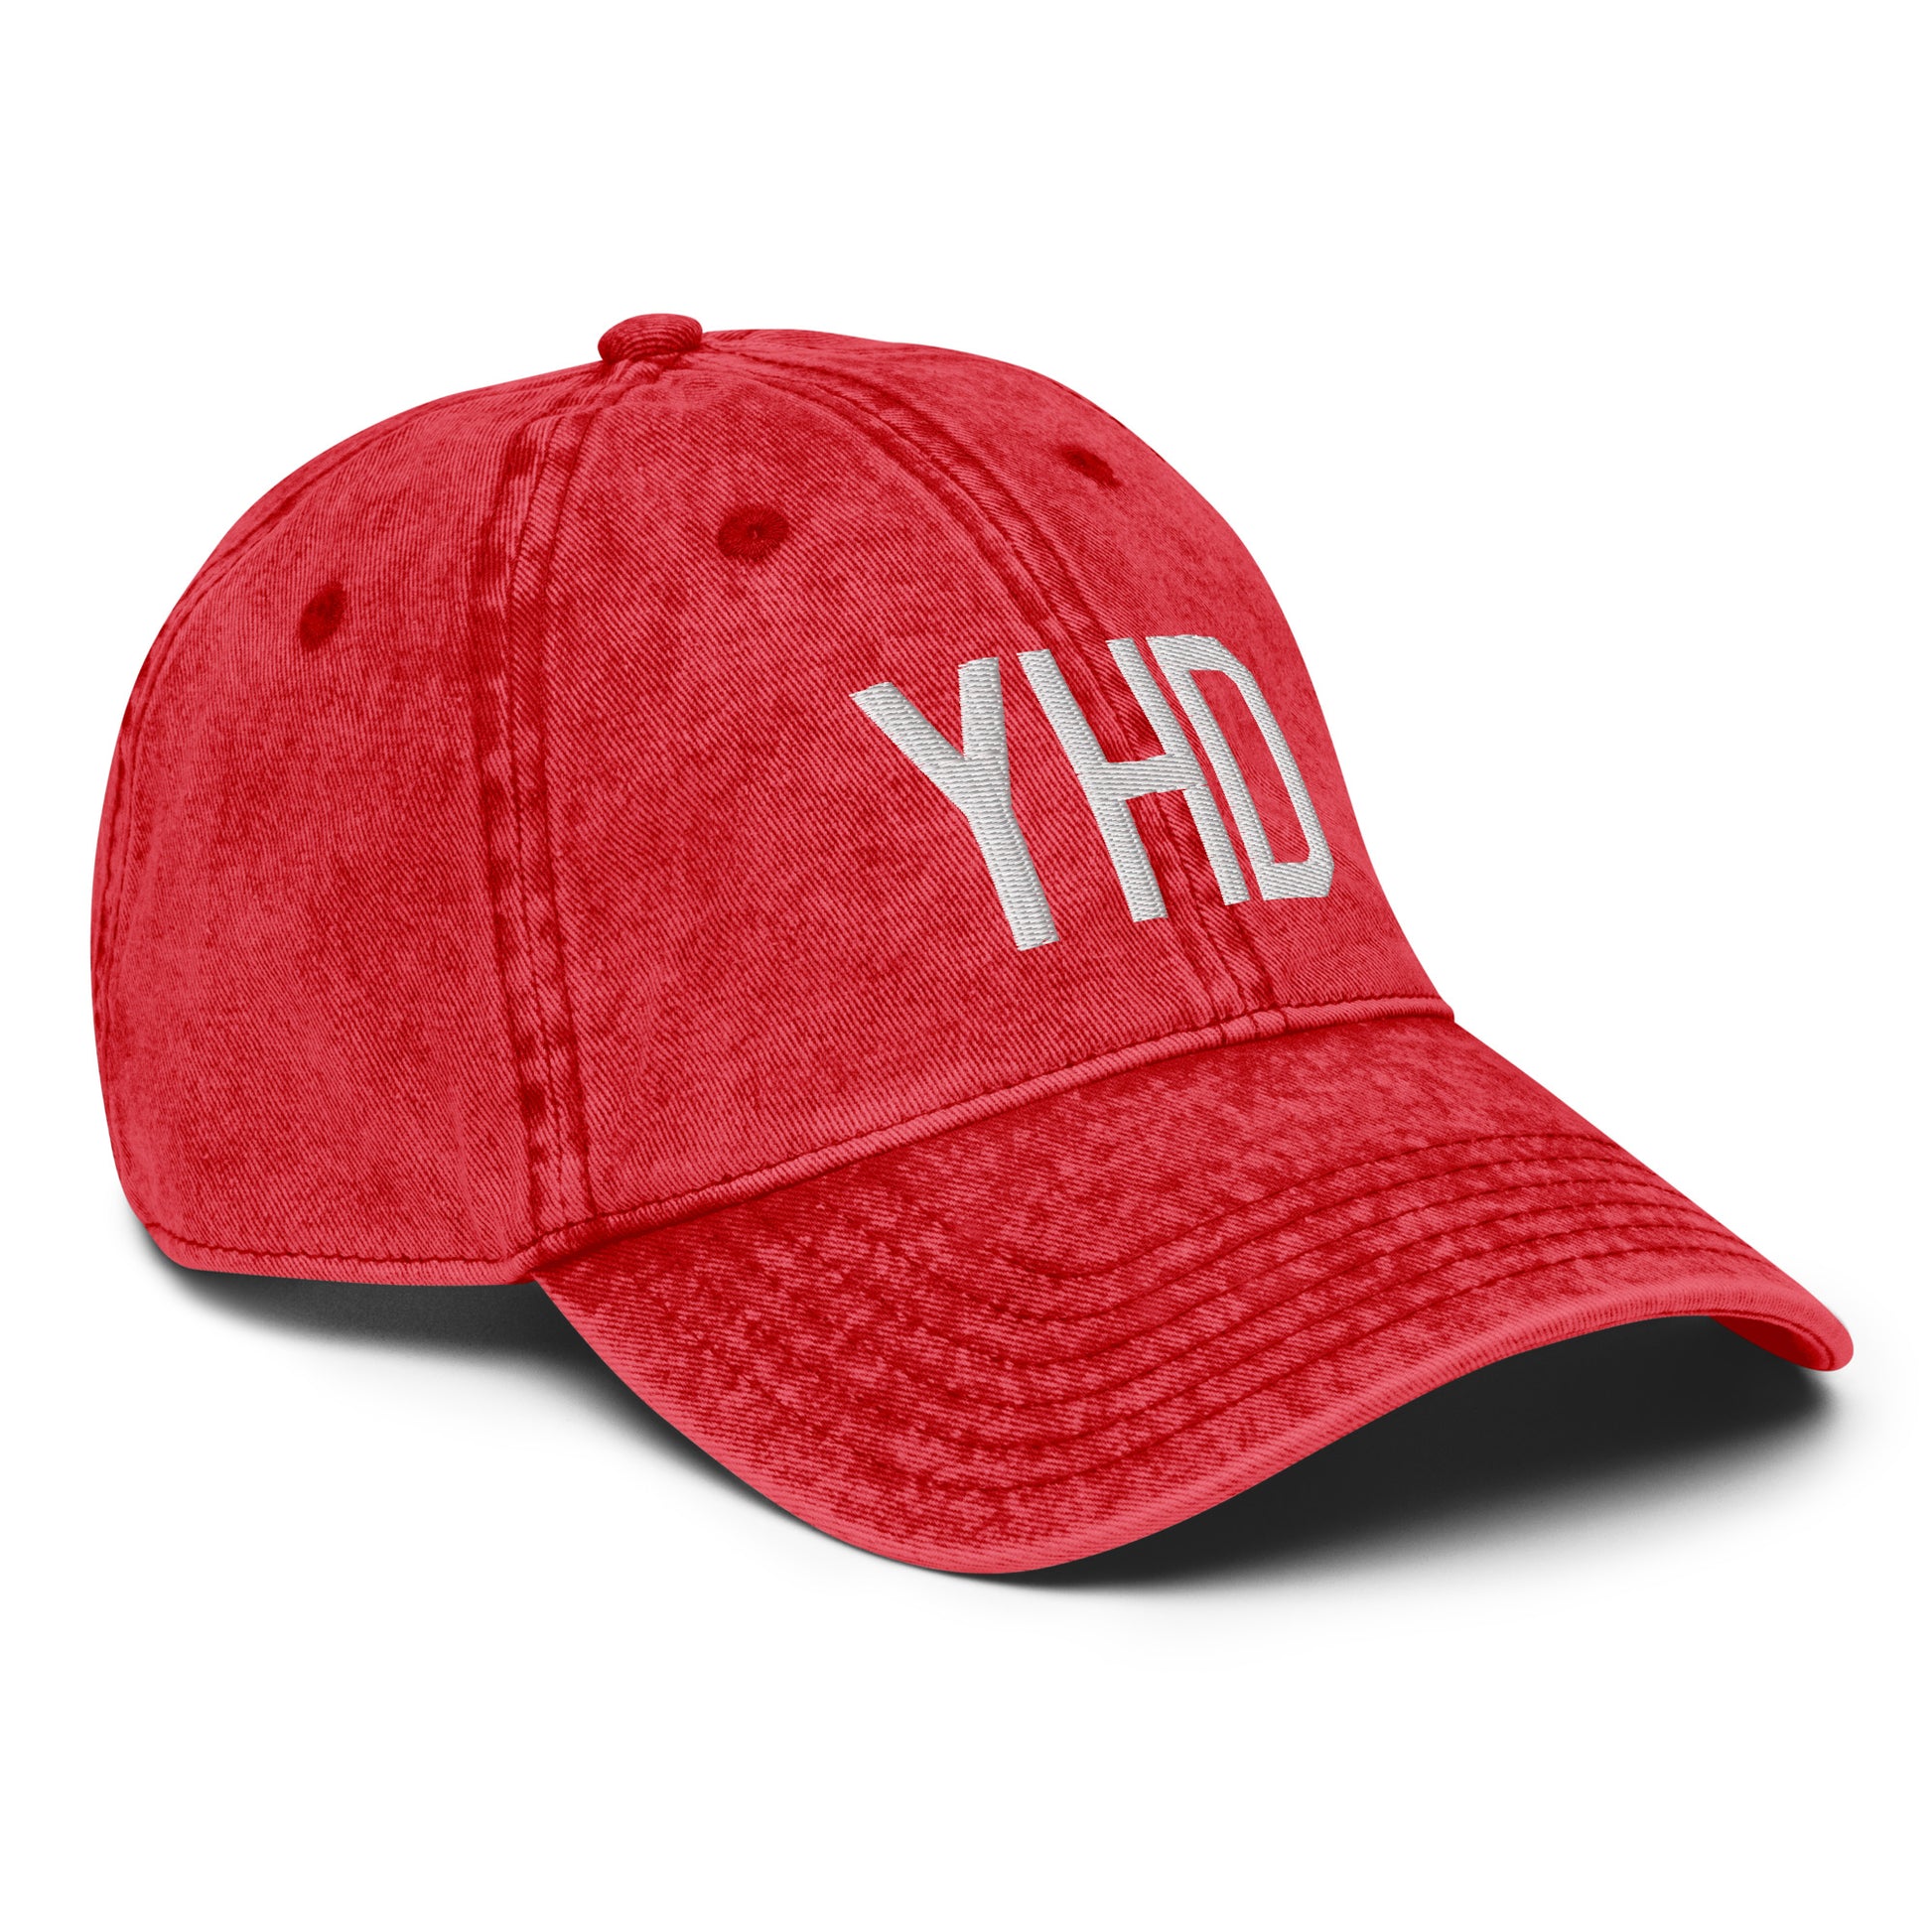 Airport Code Twill Cap - White • YHD Dryden • YHM Designs - Image 24